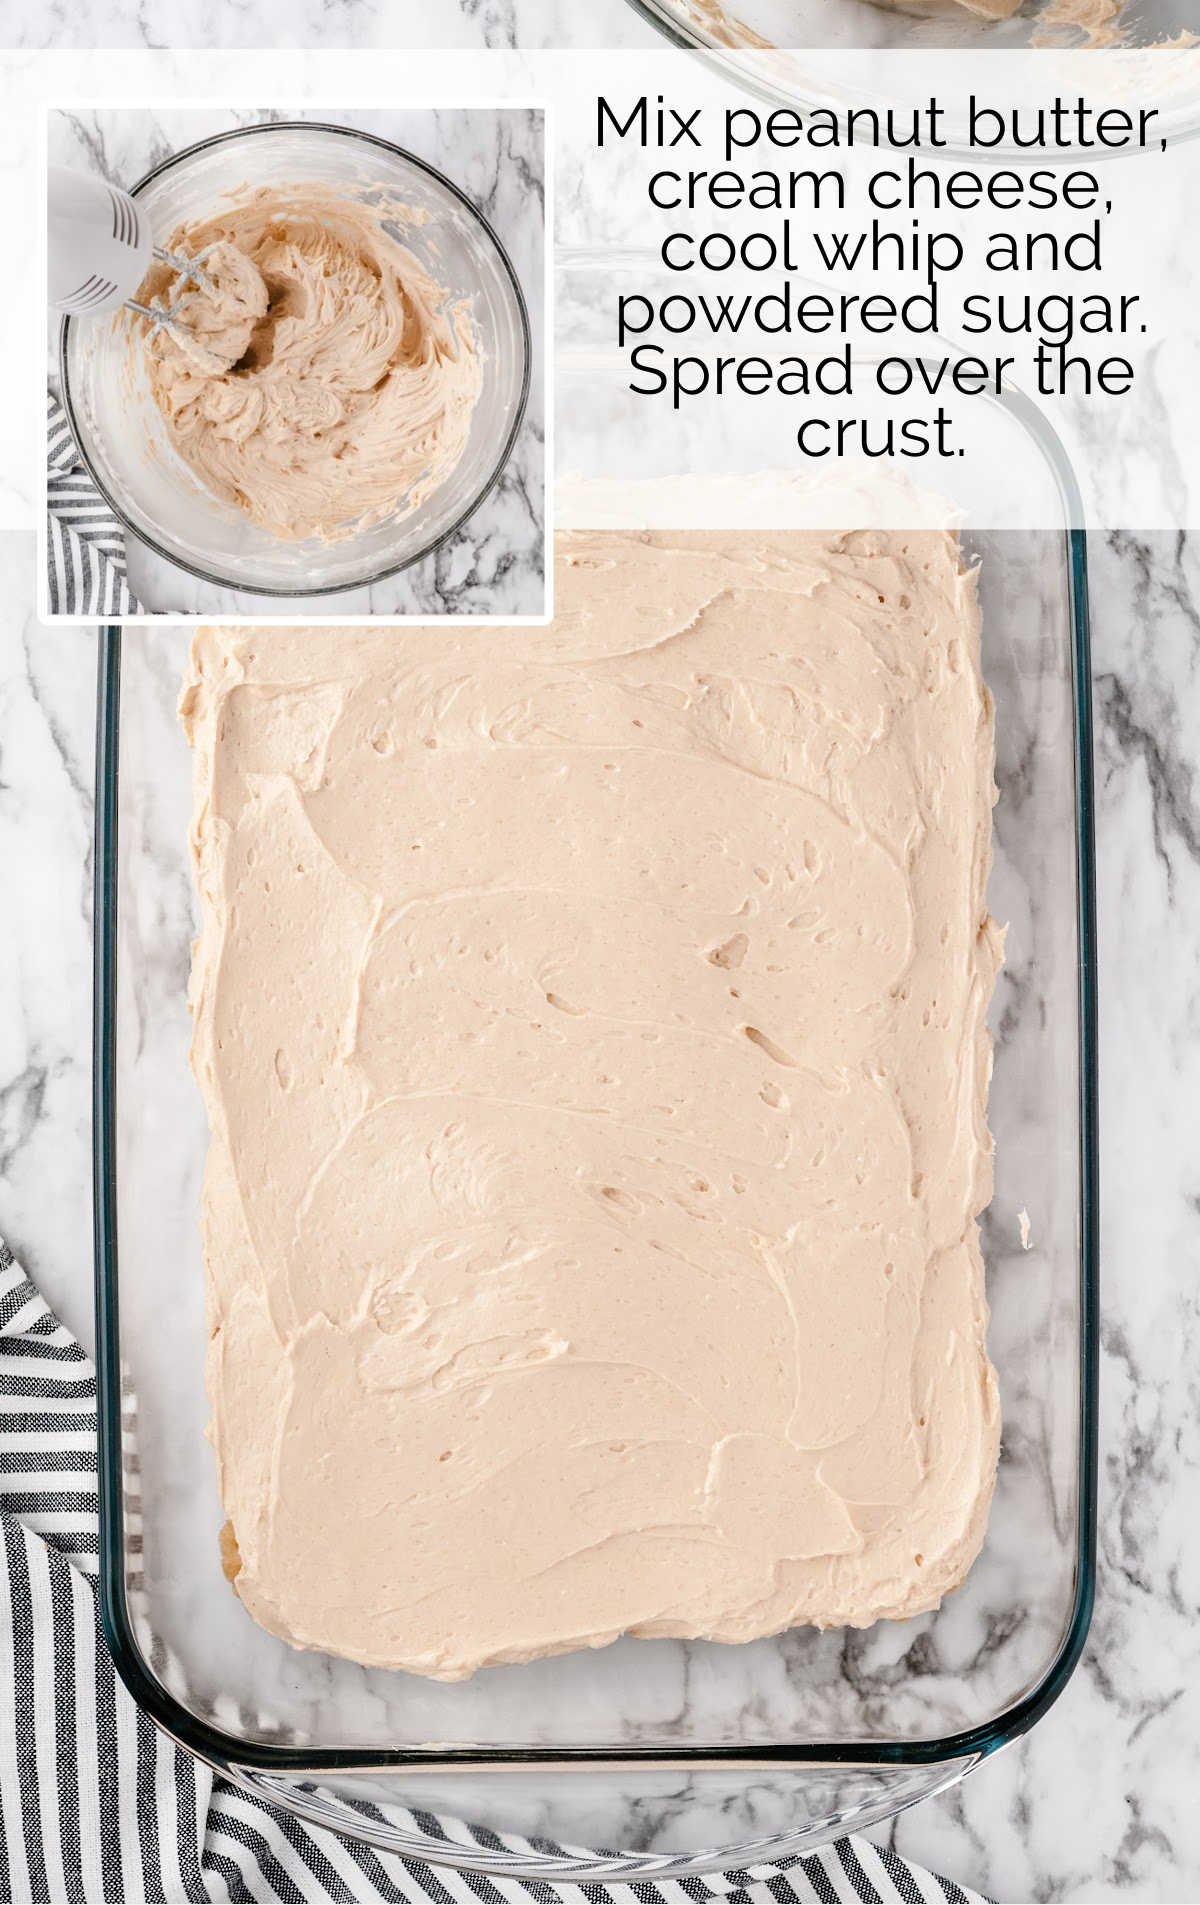 Ingredients blended together and spread over the cake in a baking dish